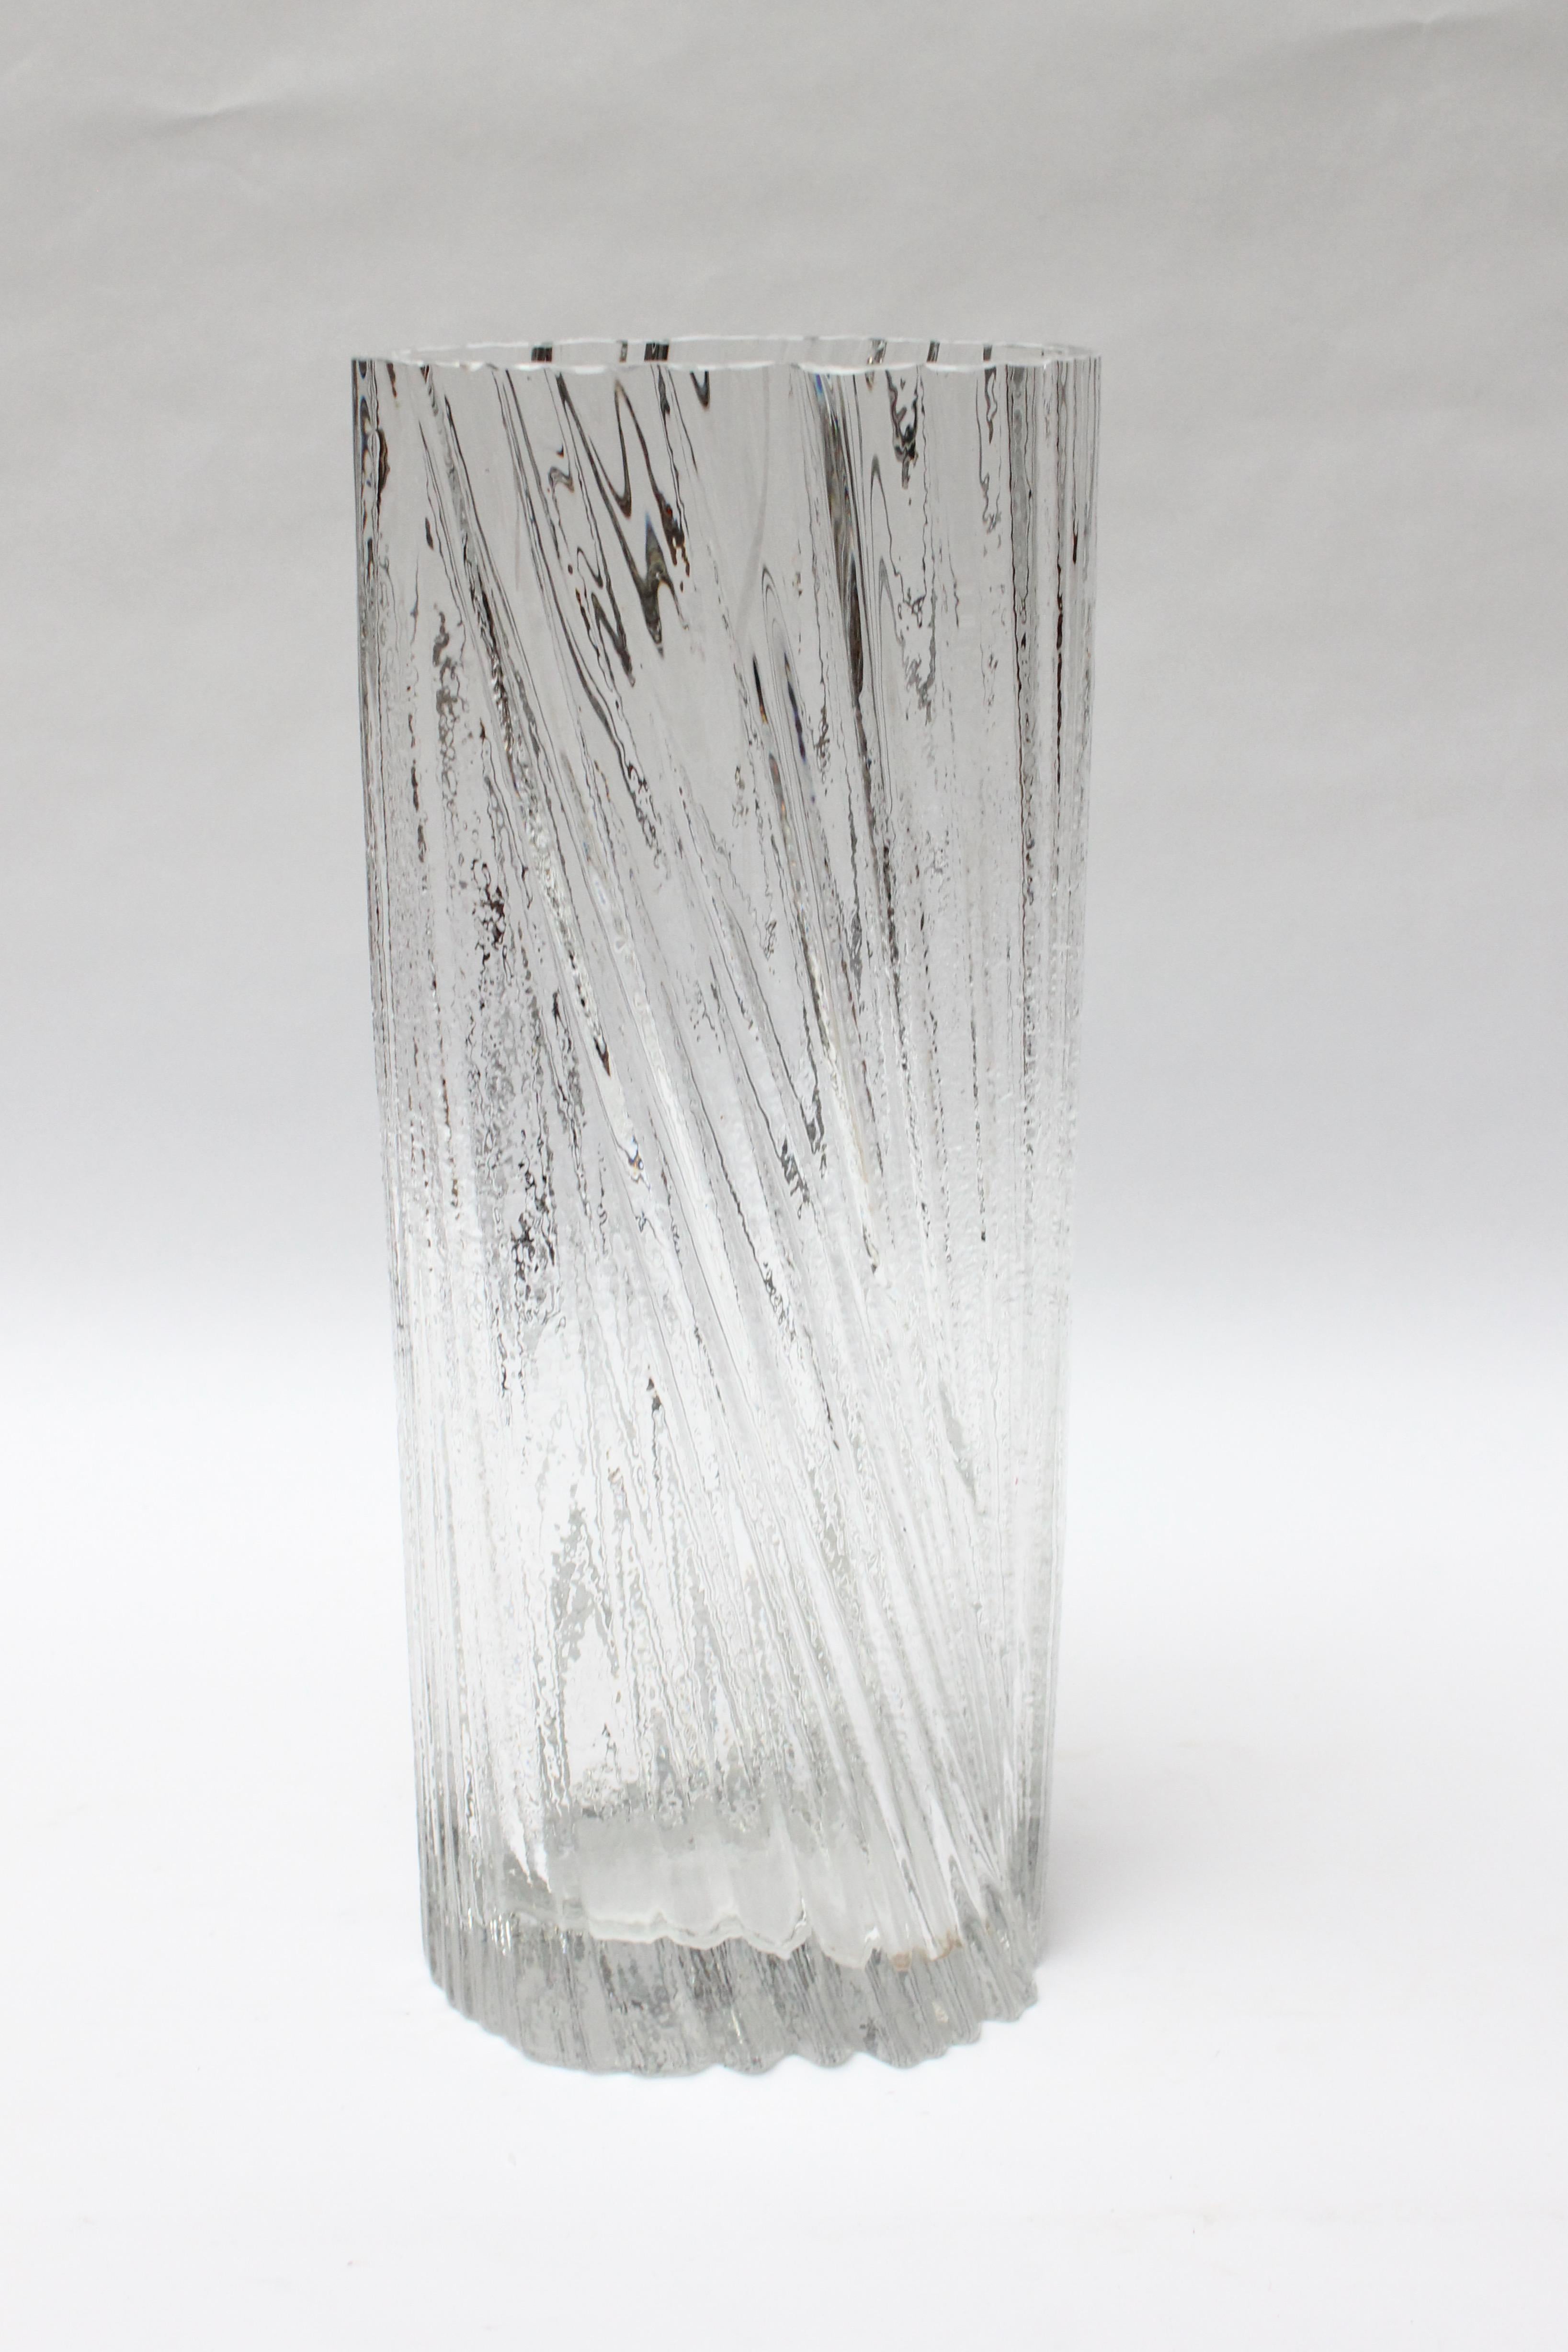 Large Mid-Century Modern Glass Vase by Tapio Wirkkala In Good Condition For Sale In Brooklyn, NY